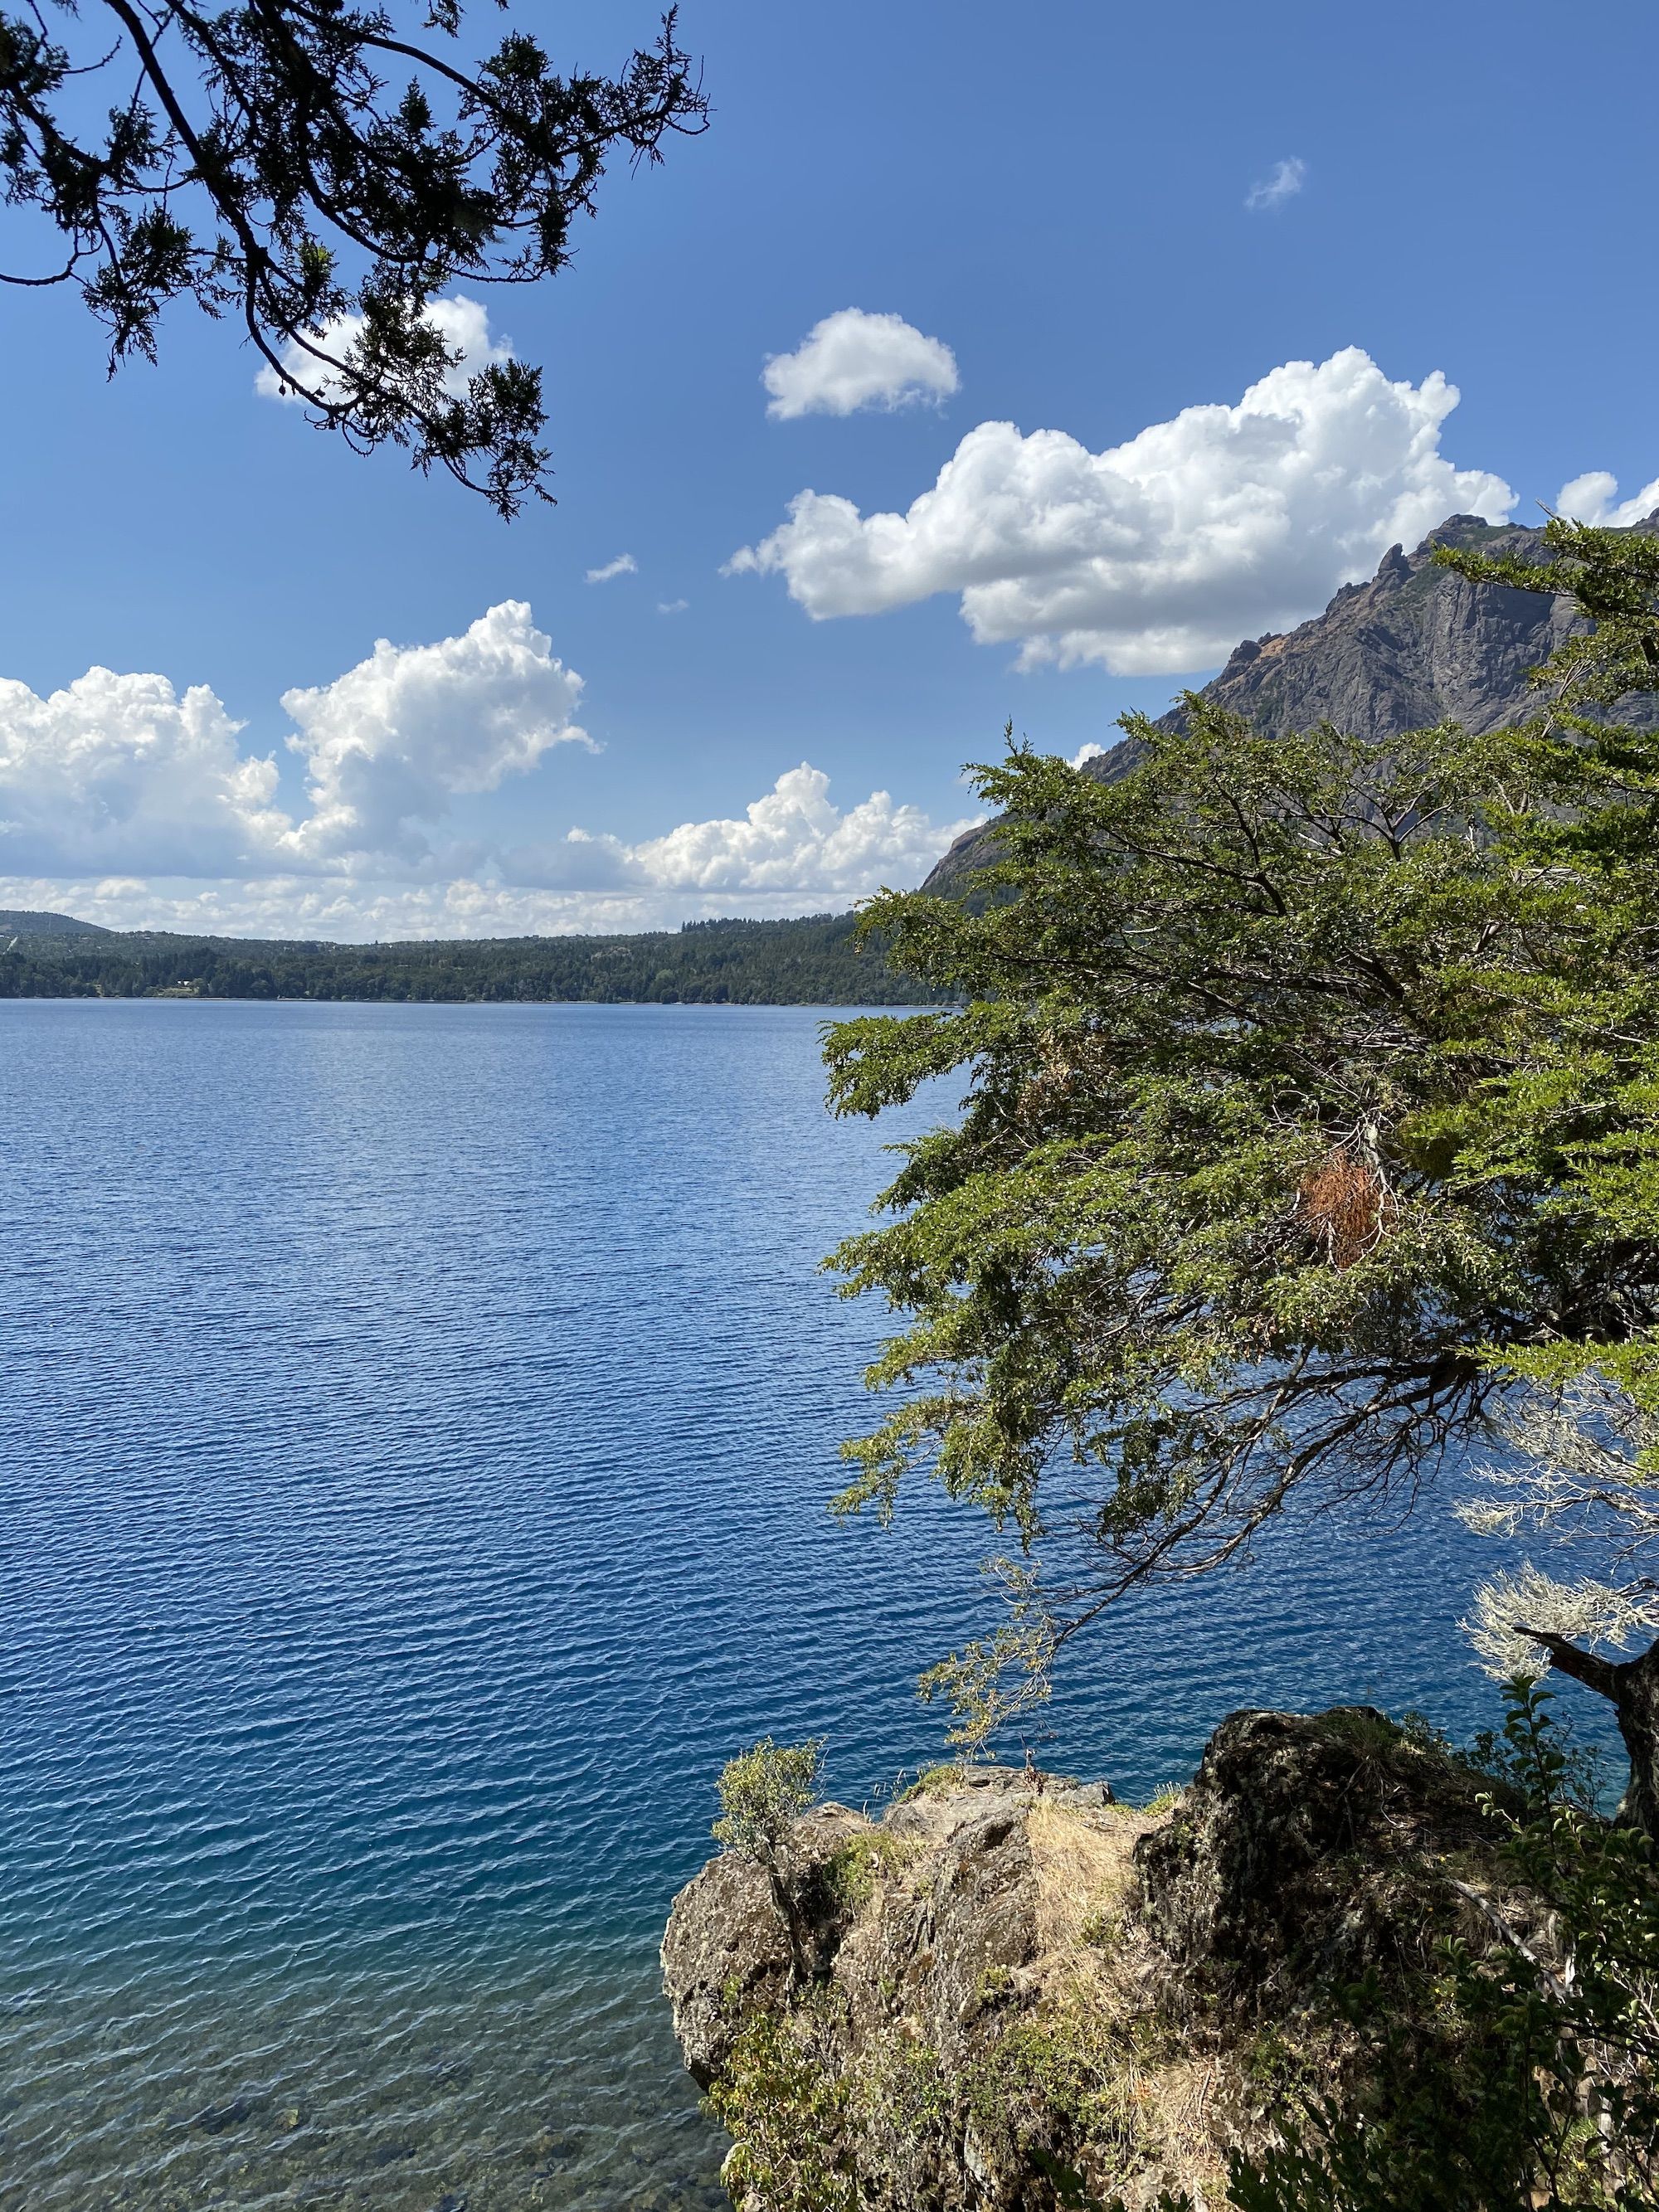 A blue lake with a rock and a tree in the foreground